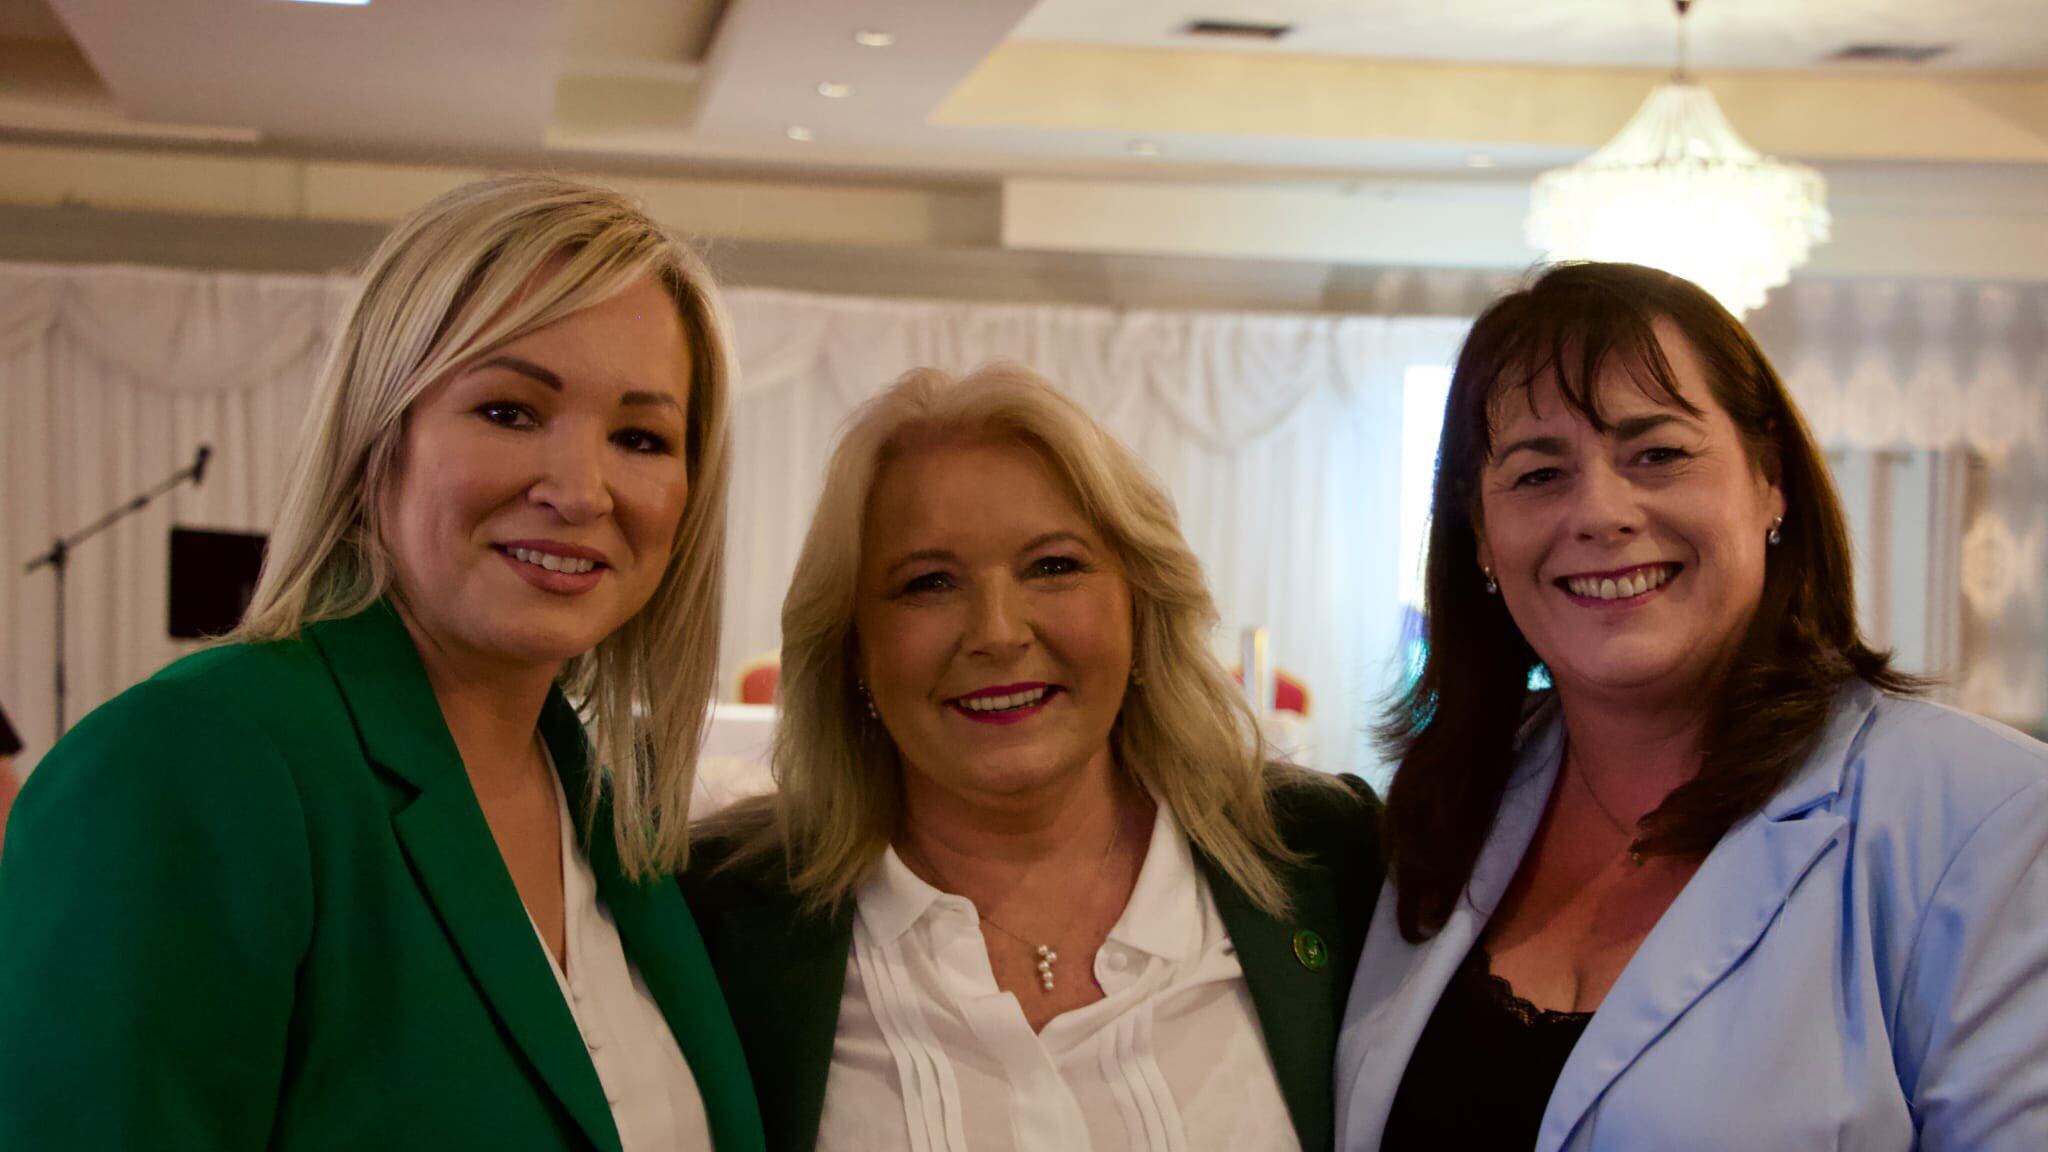 Sinn Fein Fermanagh South Tyrone candidate Pat Cullen with Michelle O'Neill and Michelle Gildernew